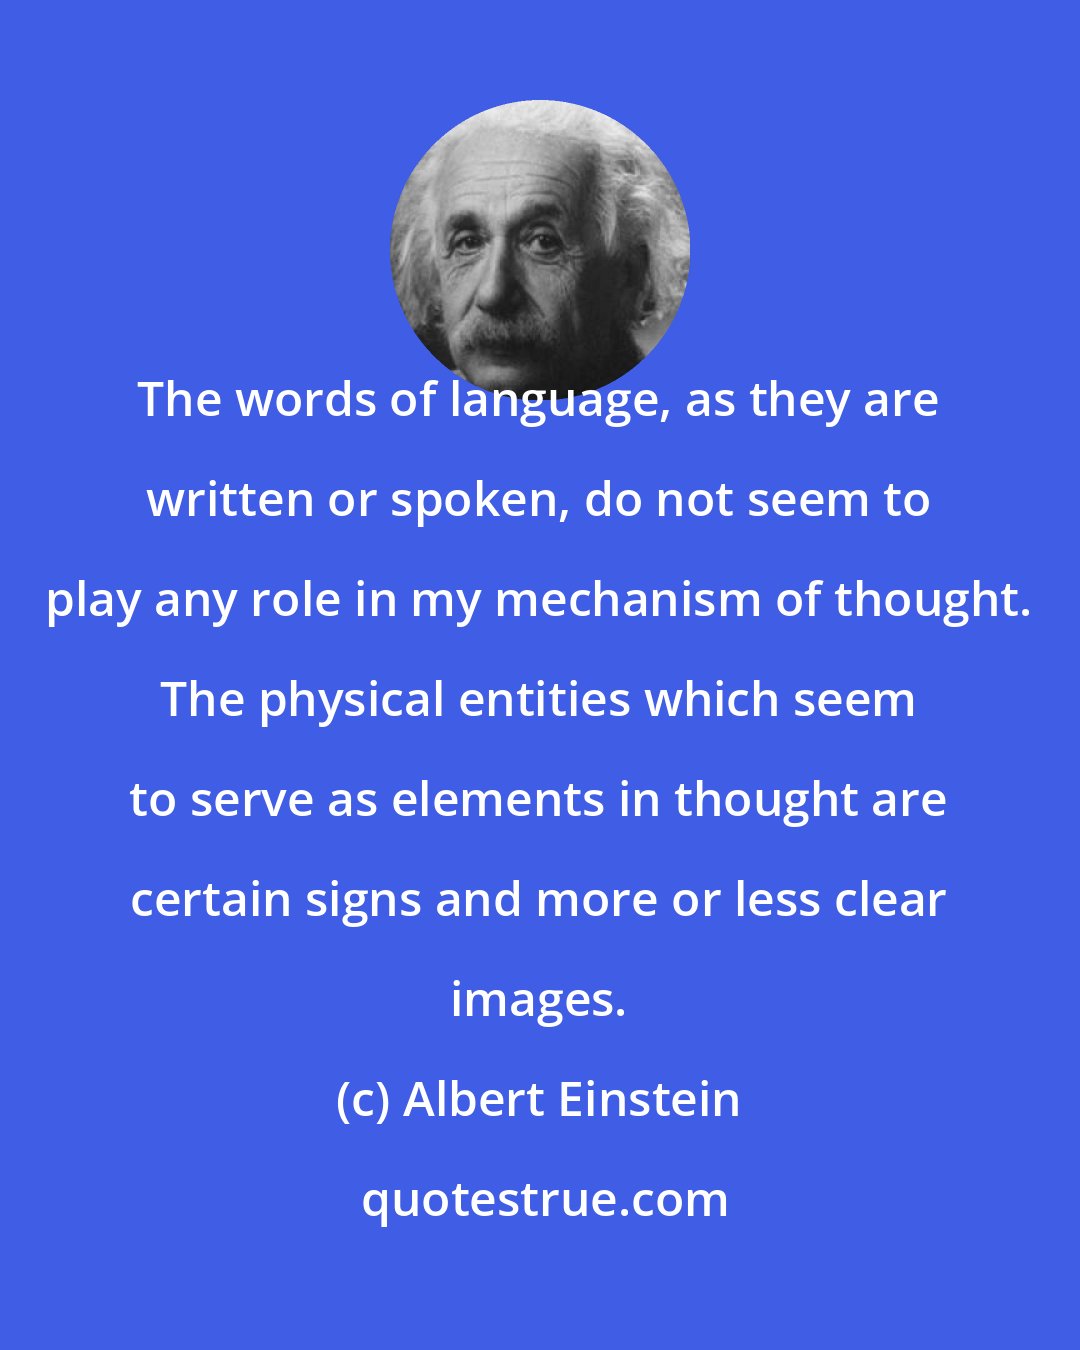 Albert Einstein: The words of language, as they are written or spoken, do not seem to play any role in my mechanism of thought. The physical entities which seem to serve as elements in thought are certain signs and more or less clear images.